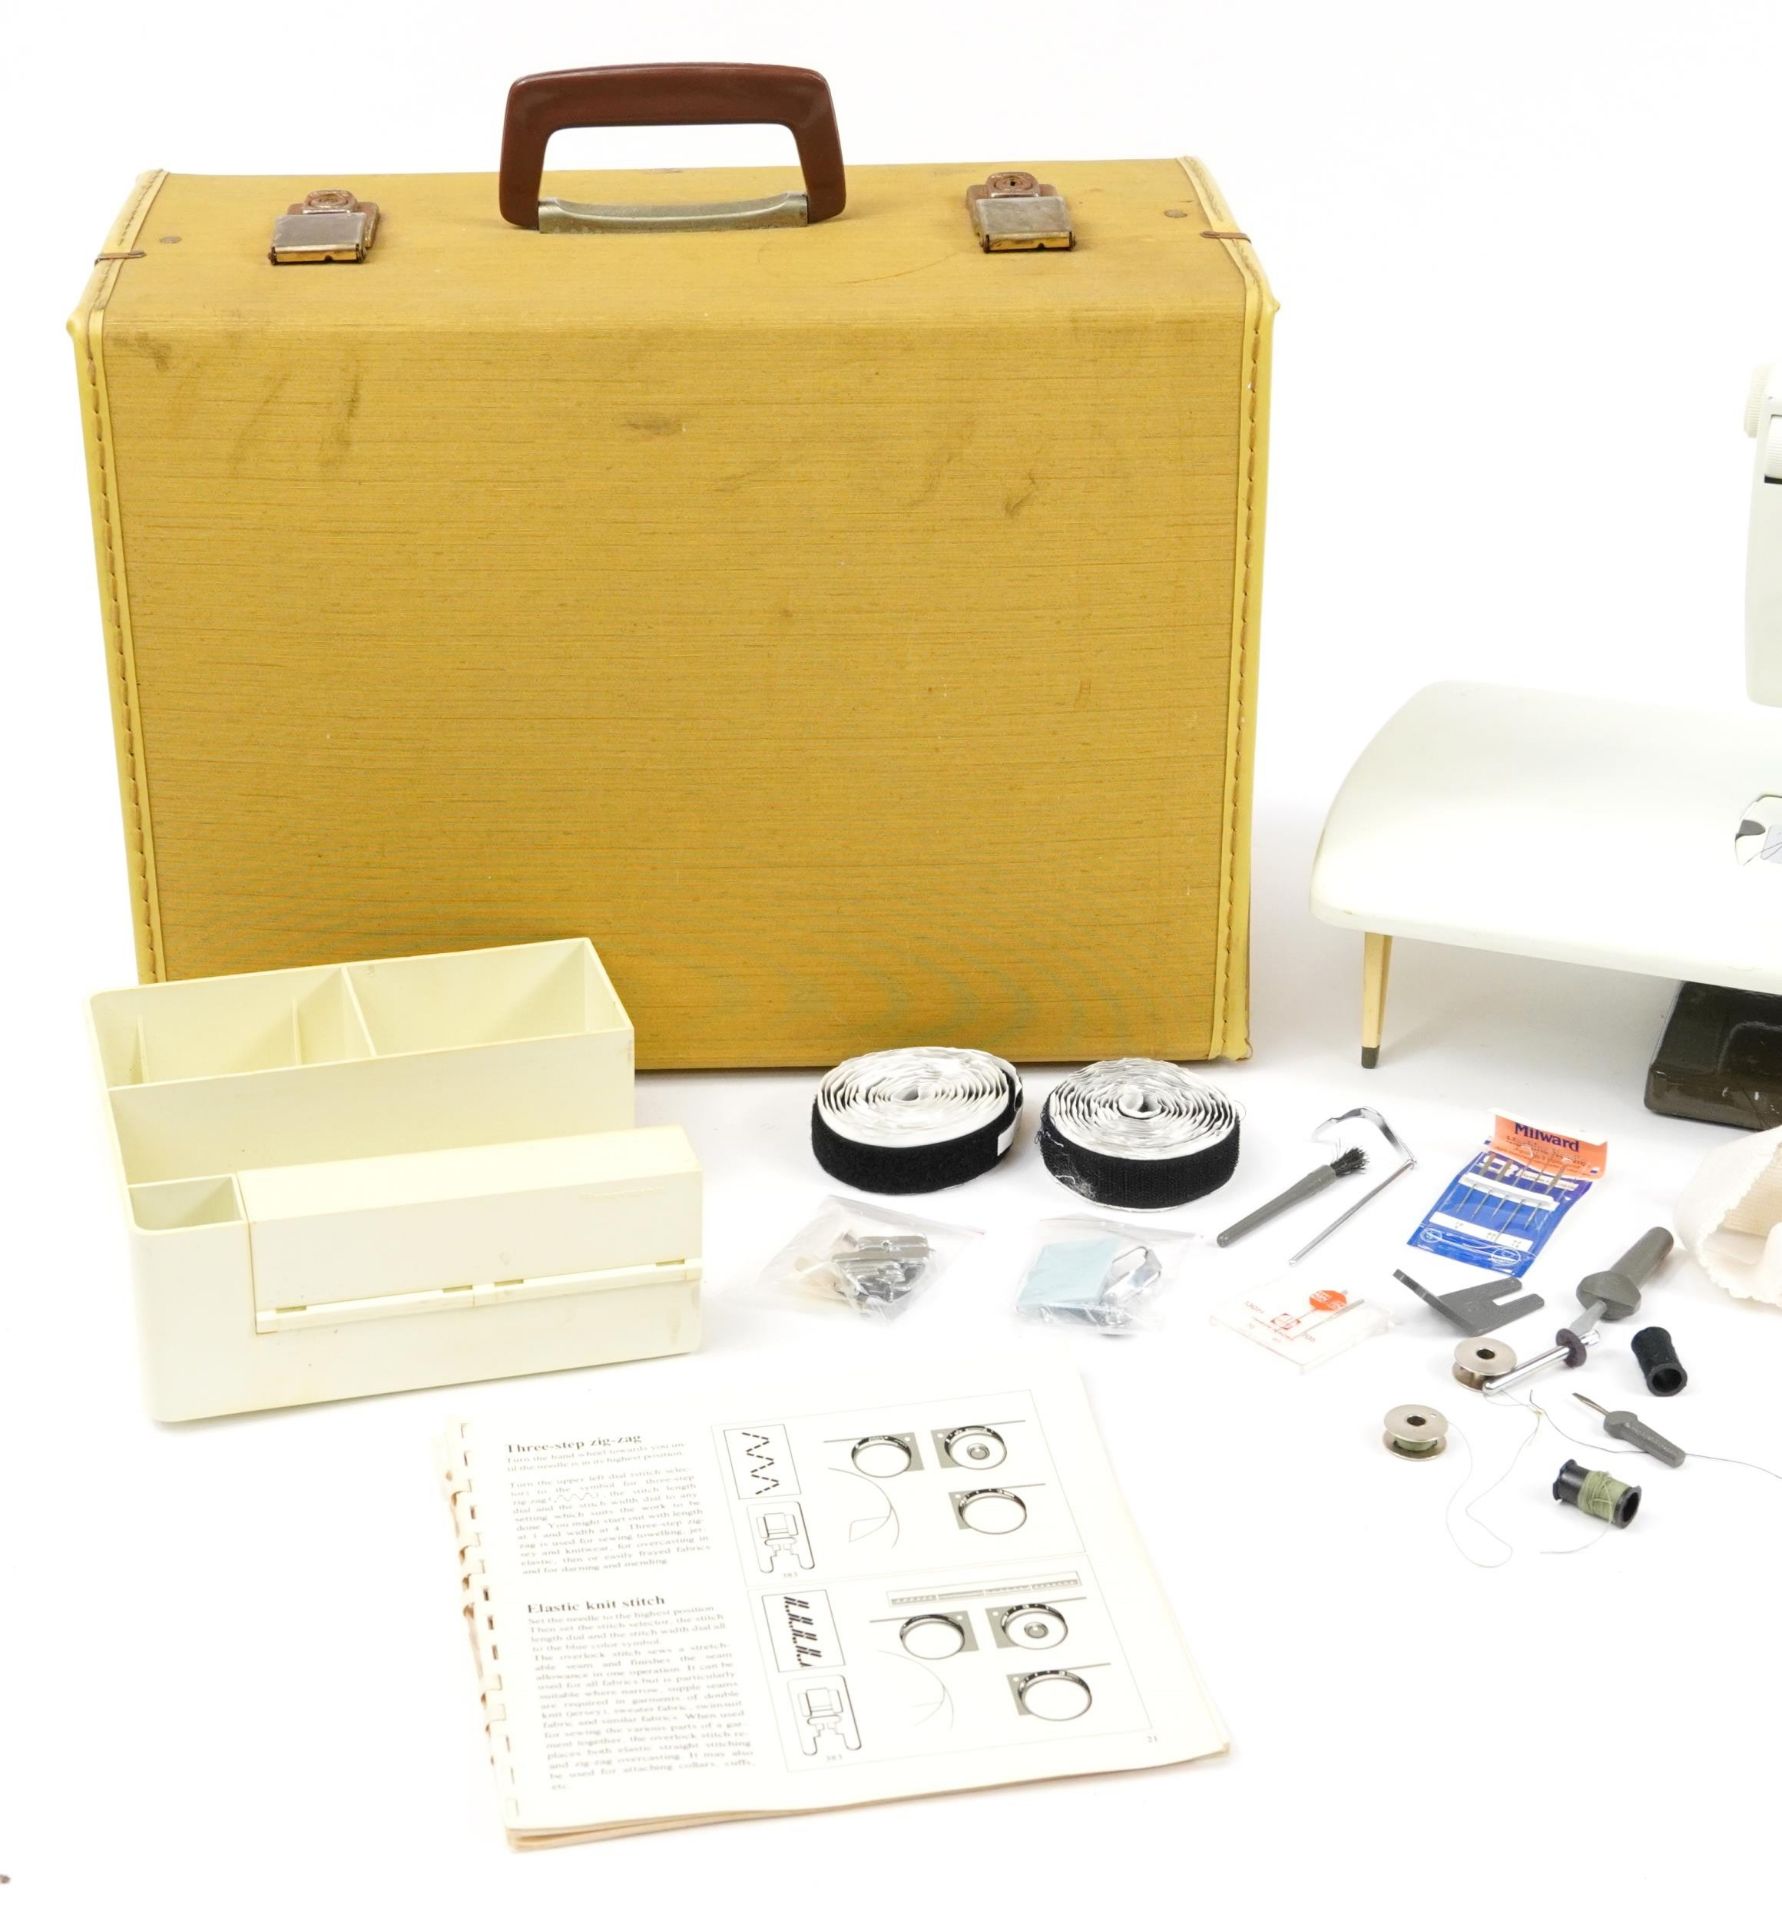 Husqvarna Viking electric sewing machine with case, model 5530 - Image 2 of 5